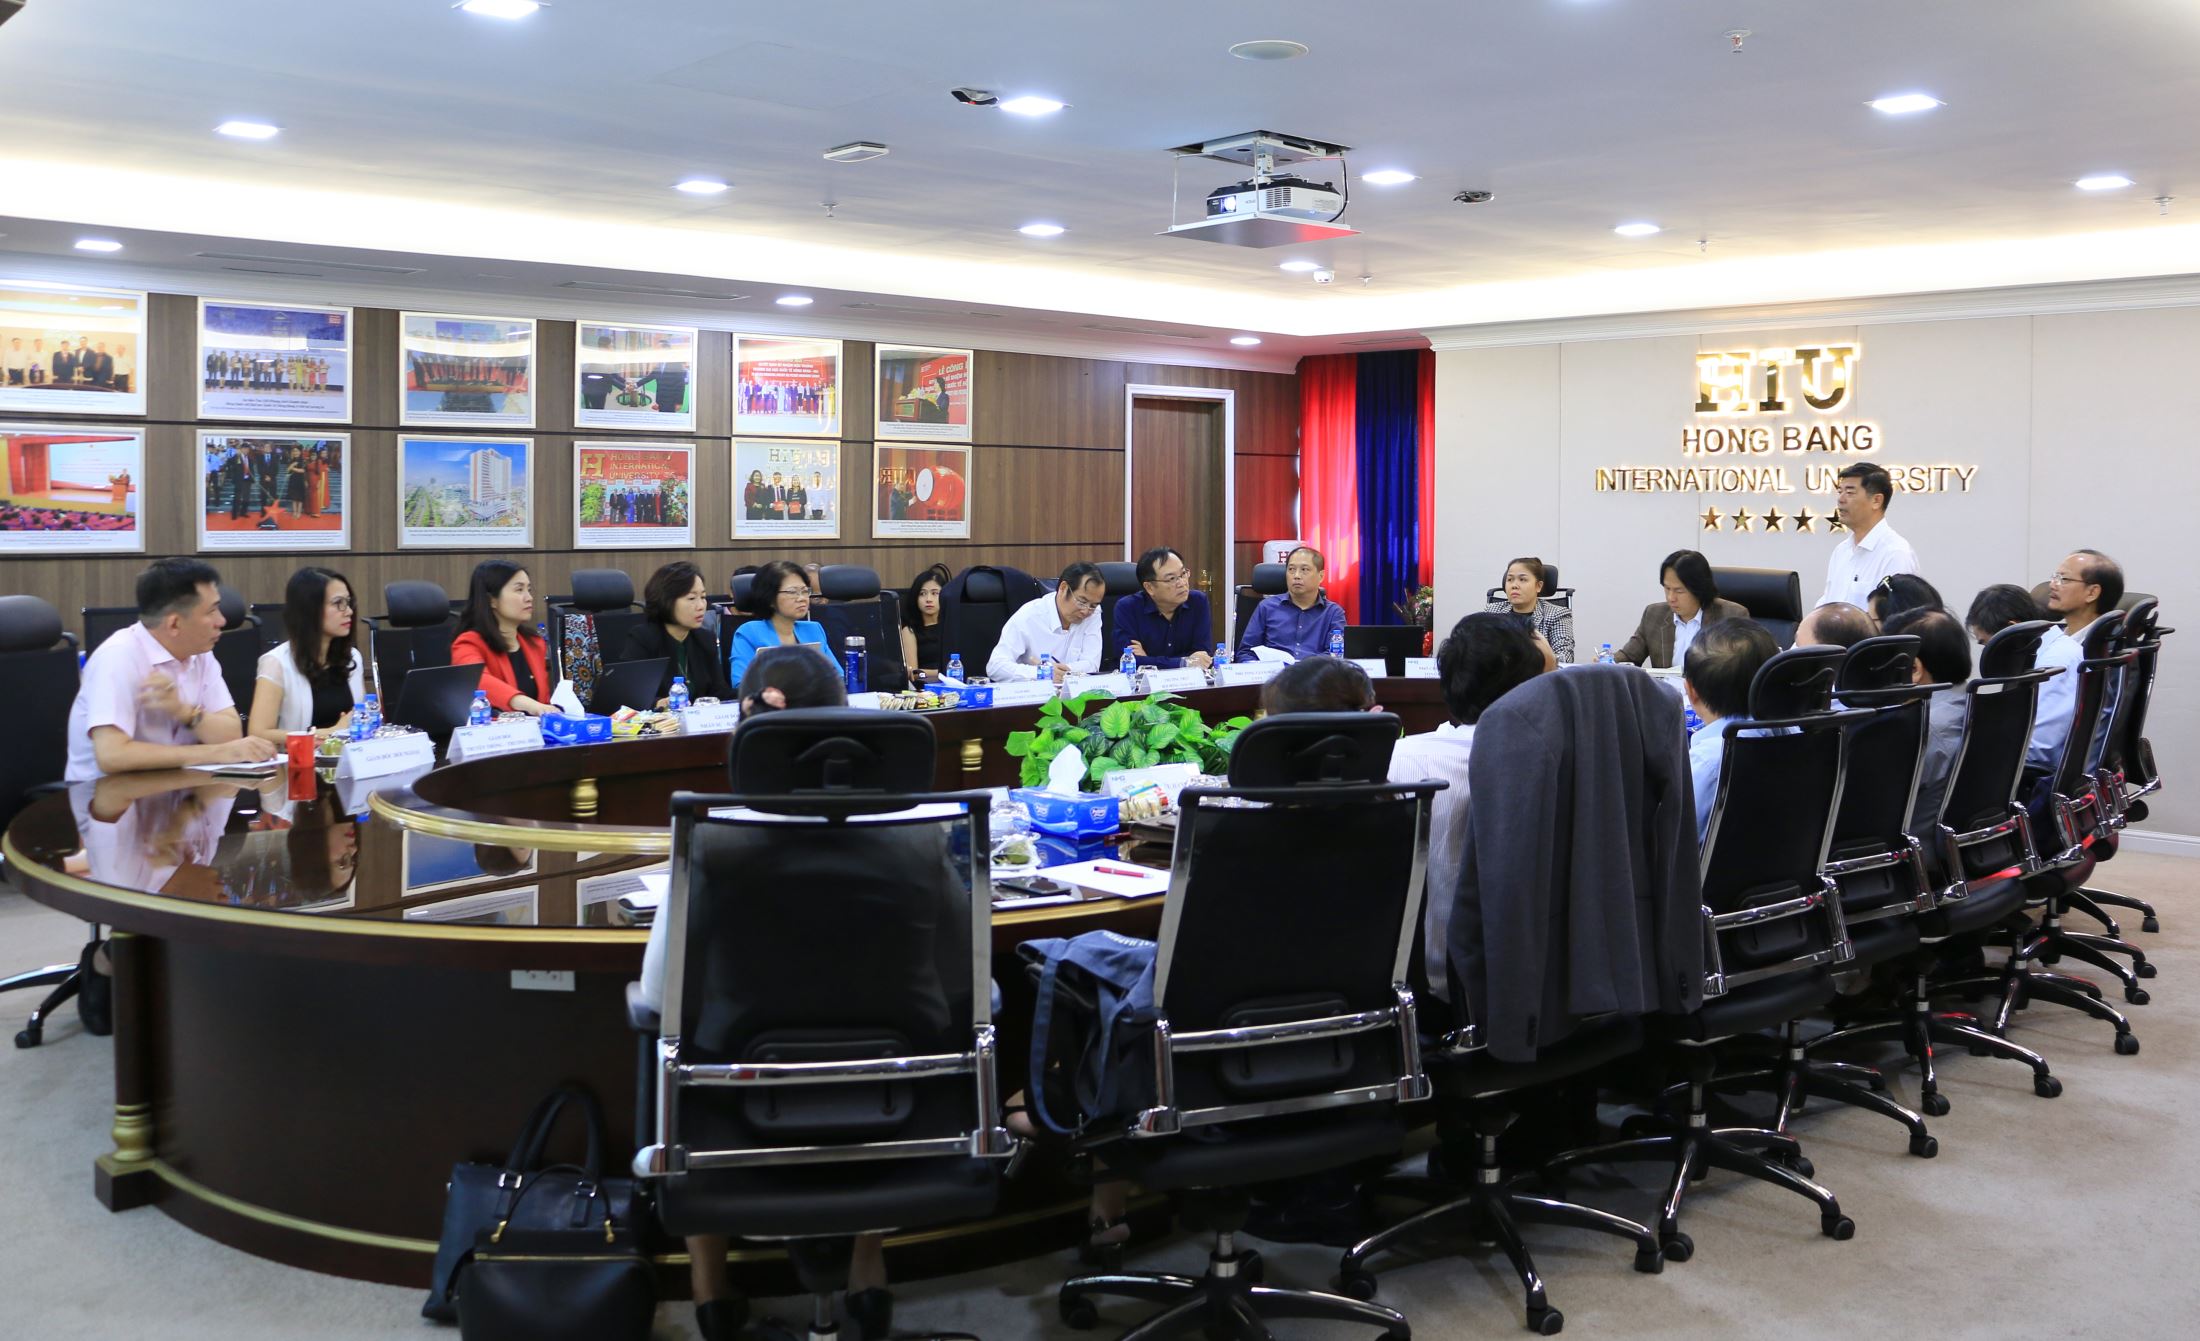 The meetings of board of management are held regularly to monitor and improve the education quality of members